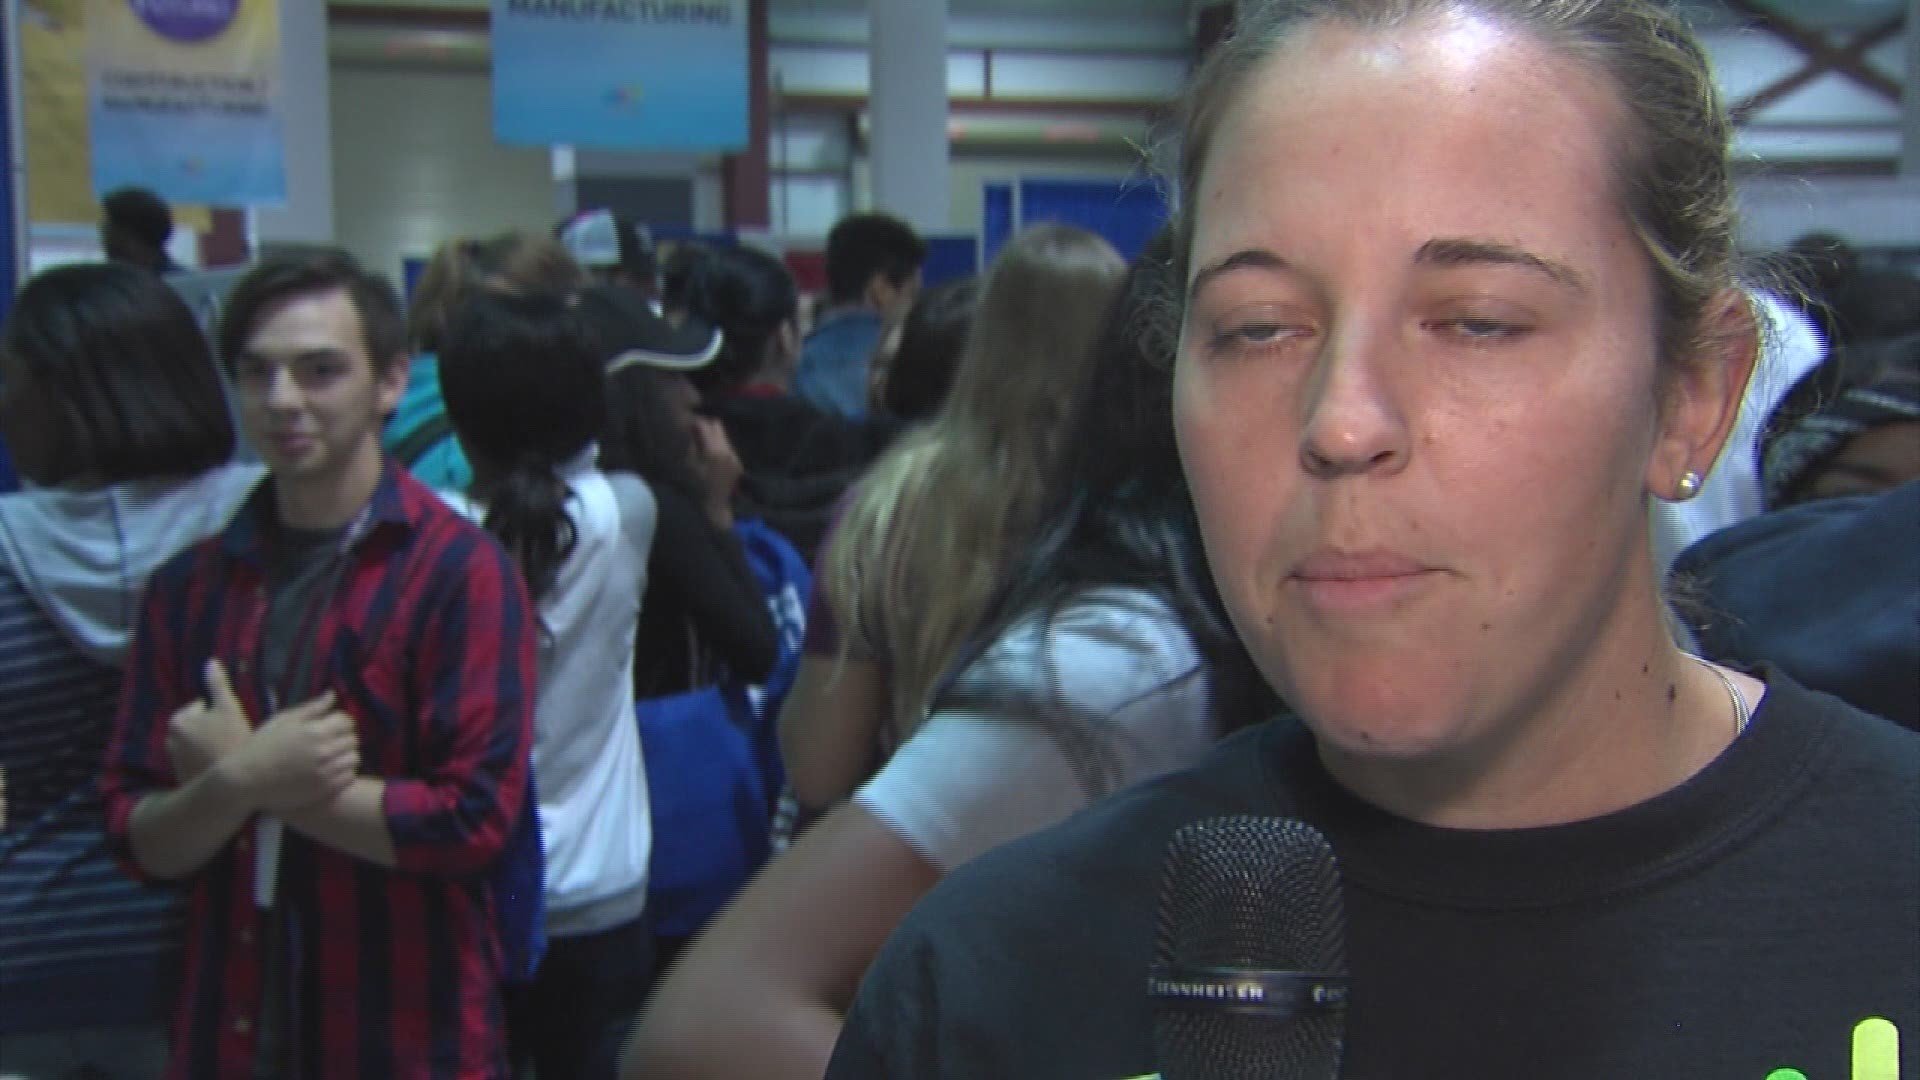 Southeast Texas students learn about their possible future at career expo